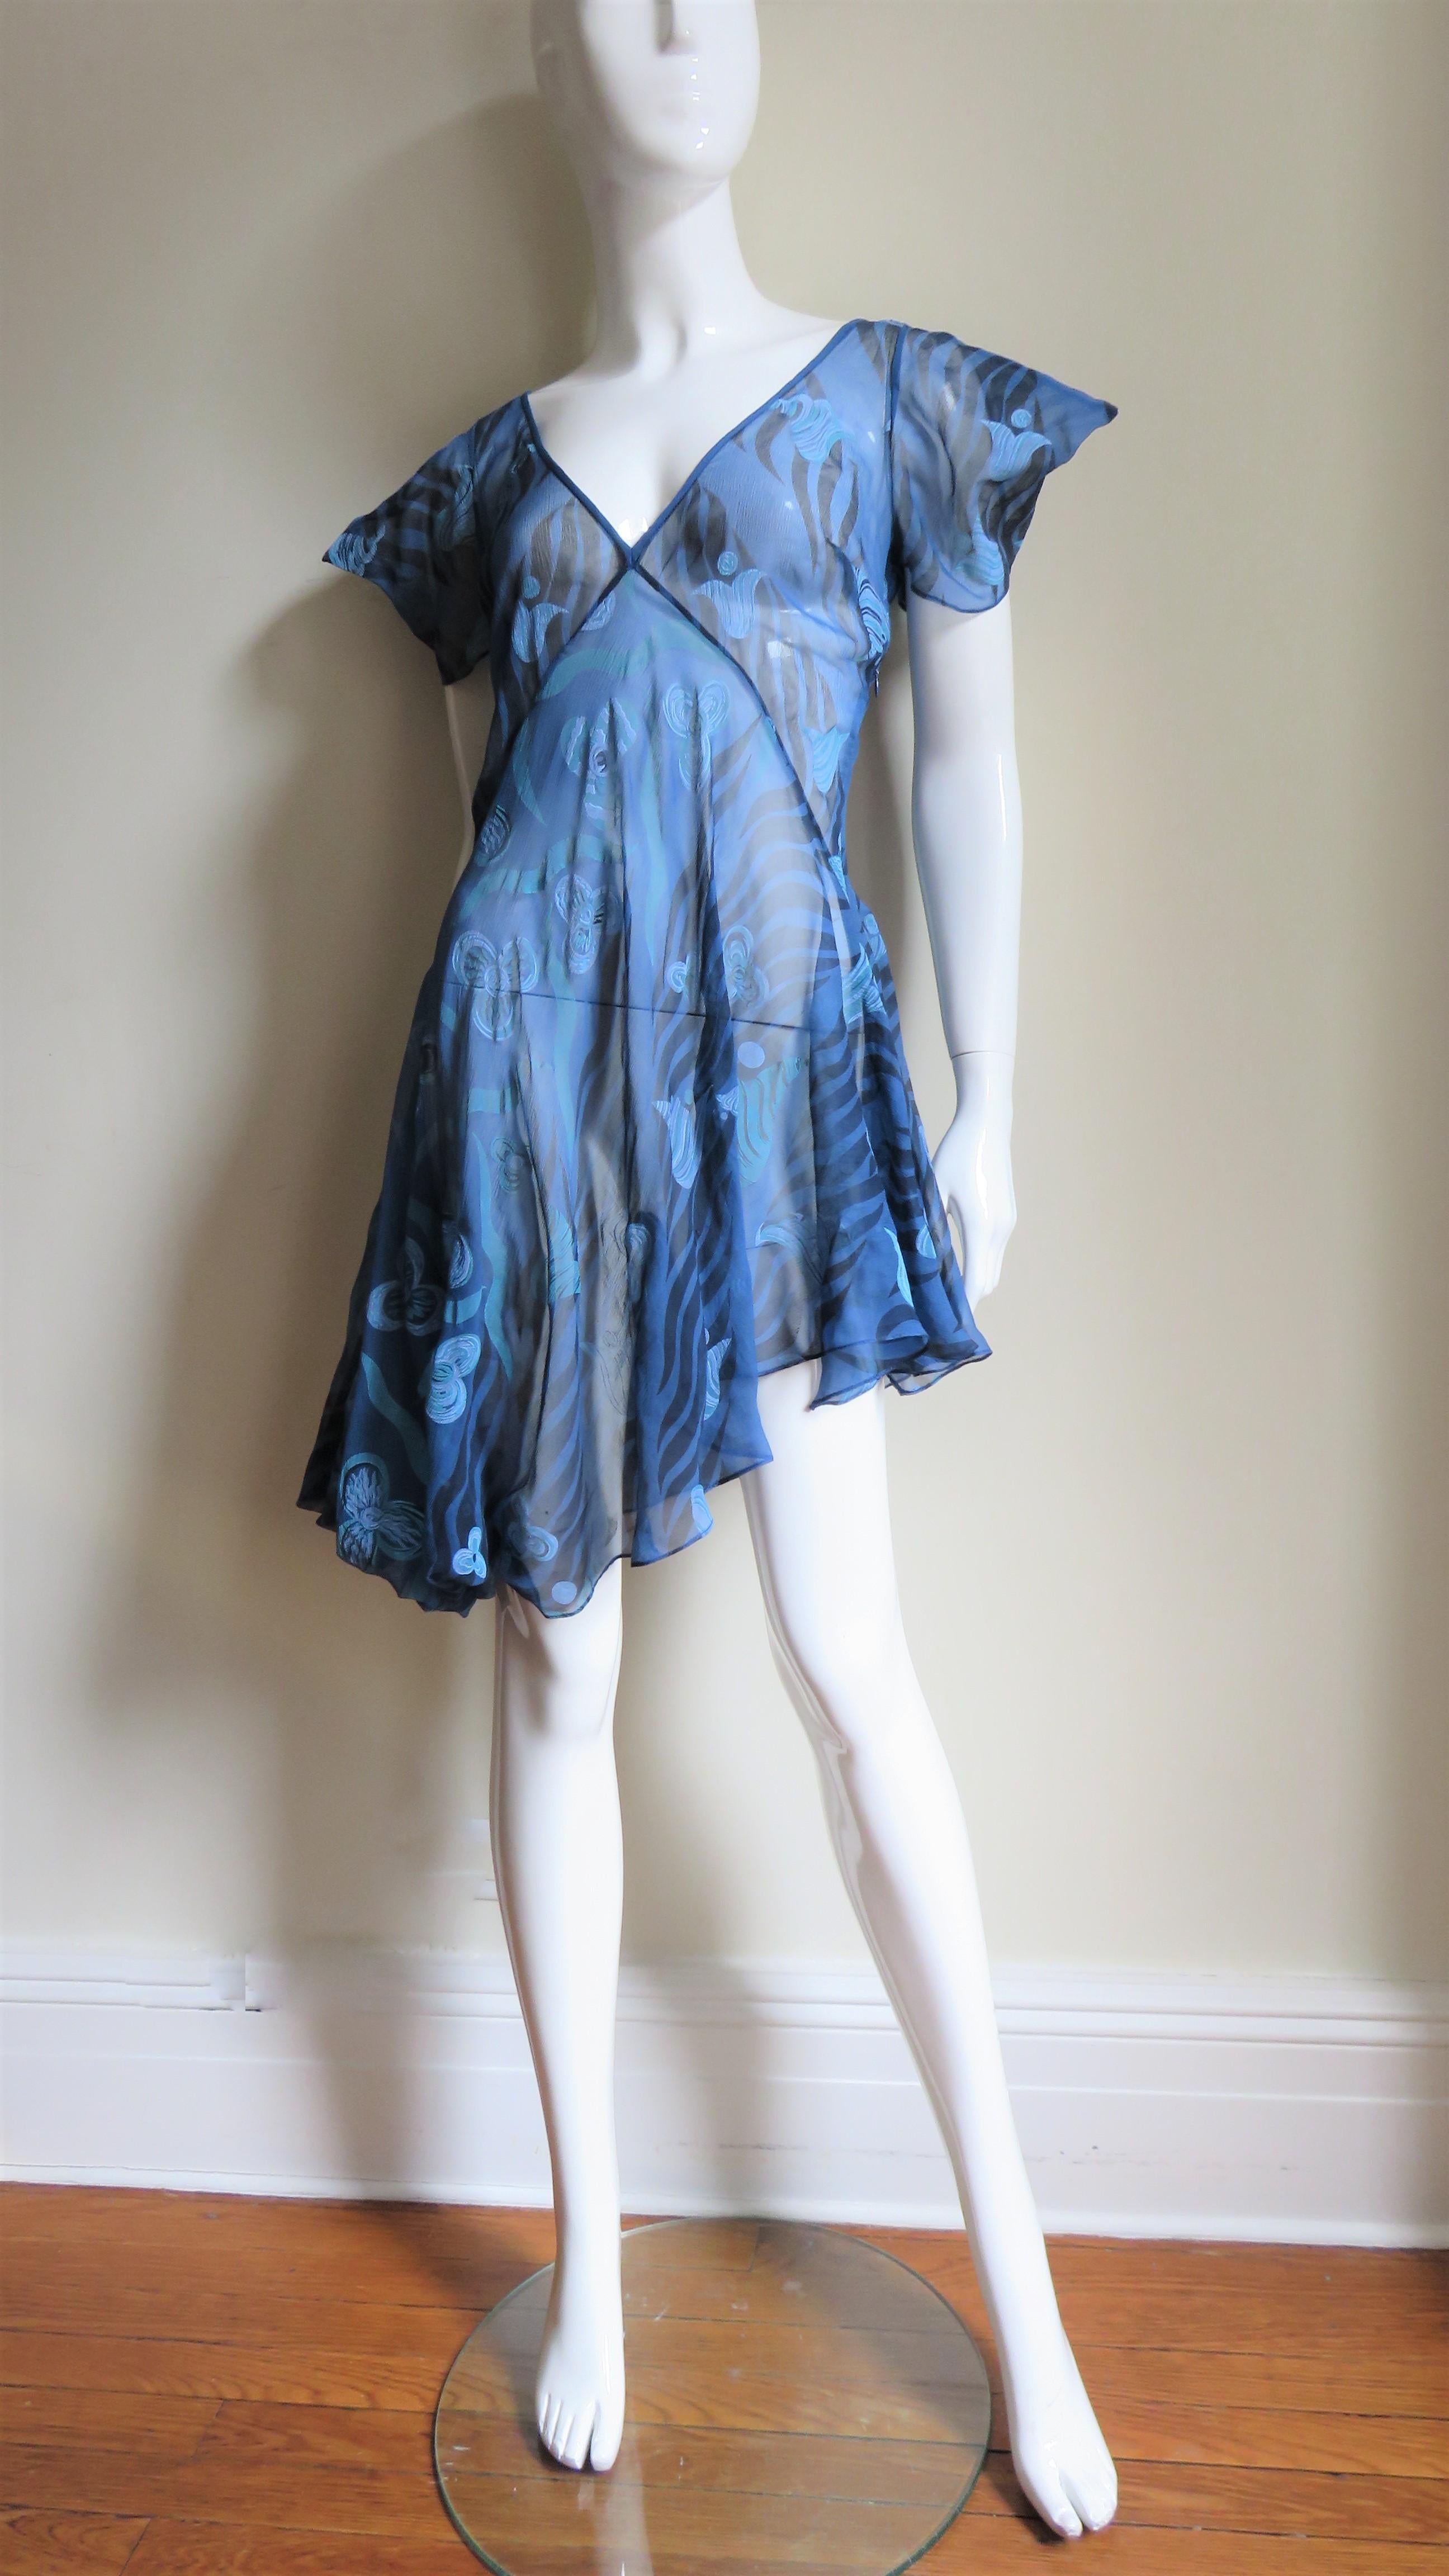 A beautiful blue sheer silk dress in an abstract flower print from Zandra Rhodes. It has a deep V neck and short sleeves accentuated with points.  It is semi fitted through the waist and than flares to the asymmetric hemline.  It is unlined and has